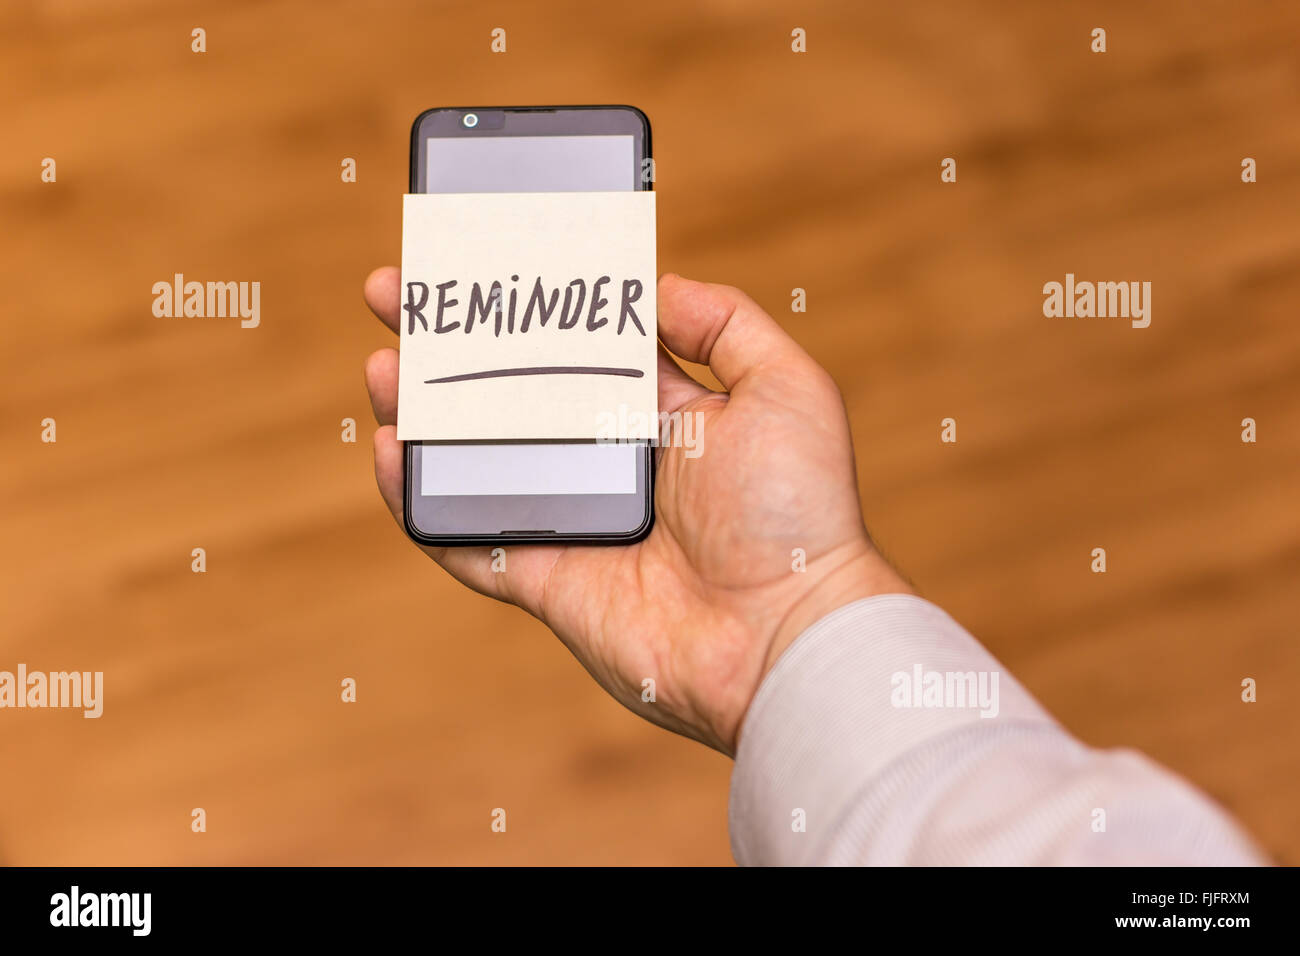 Human hand holding a smartphone with yellow note sticked on it. The word reminder is written on the note. Stock Photo